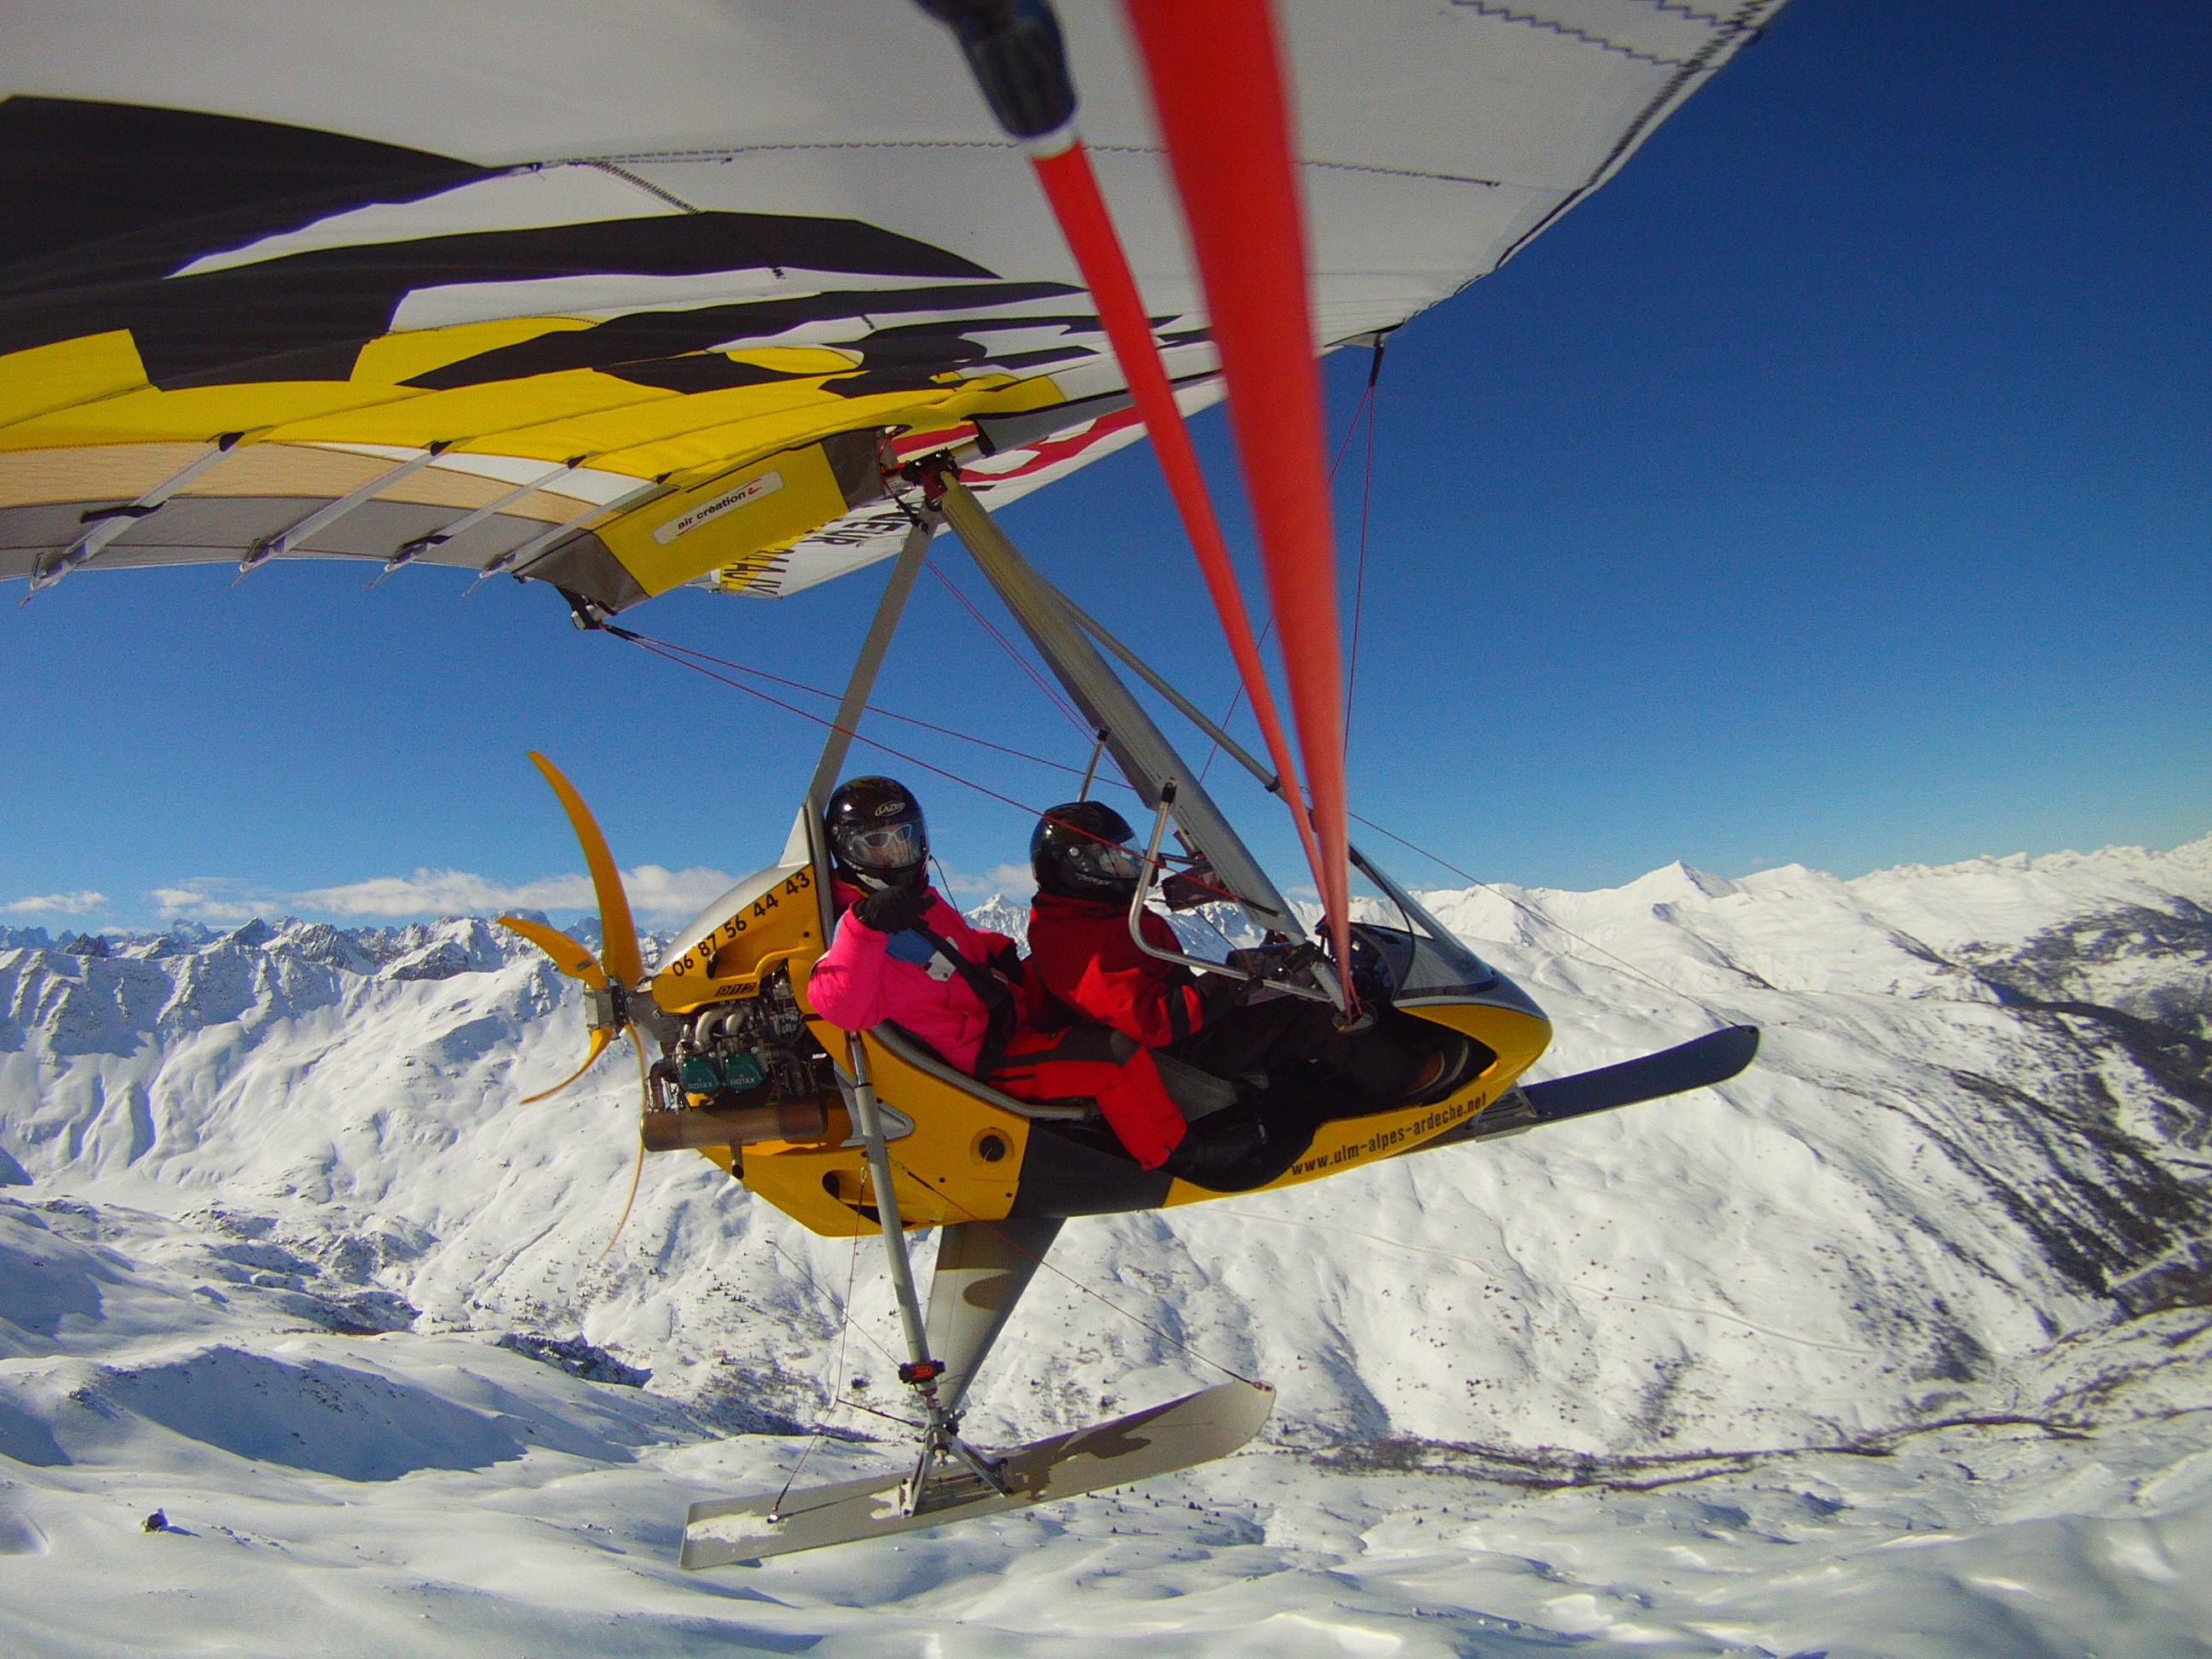 Video: Flying the Alps in Valmeinier